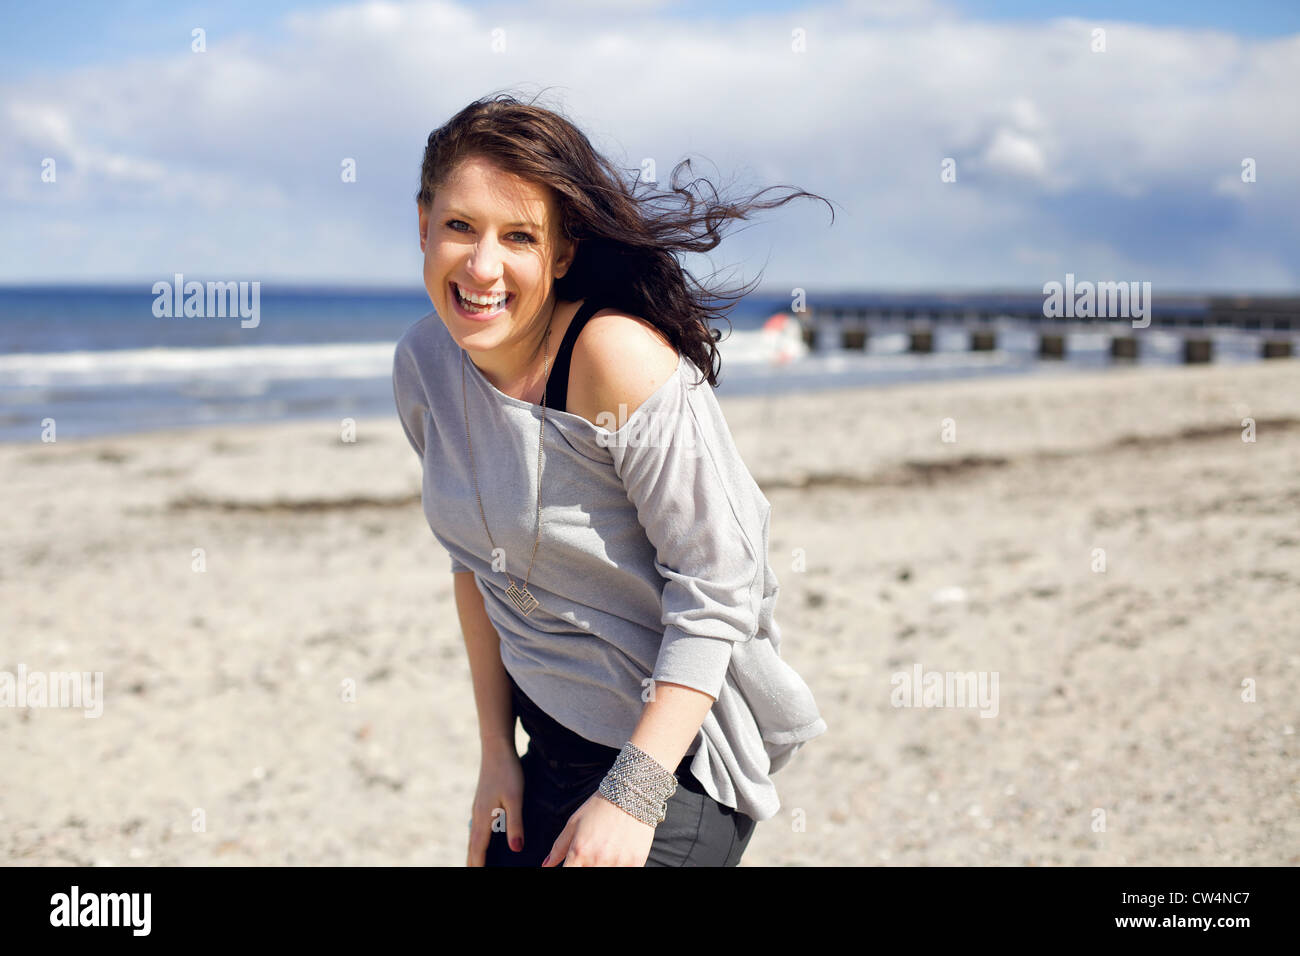 Young adult woman smiling and looking happy on the beach against the bright sky Stock Photo